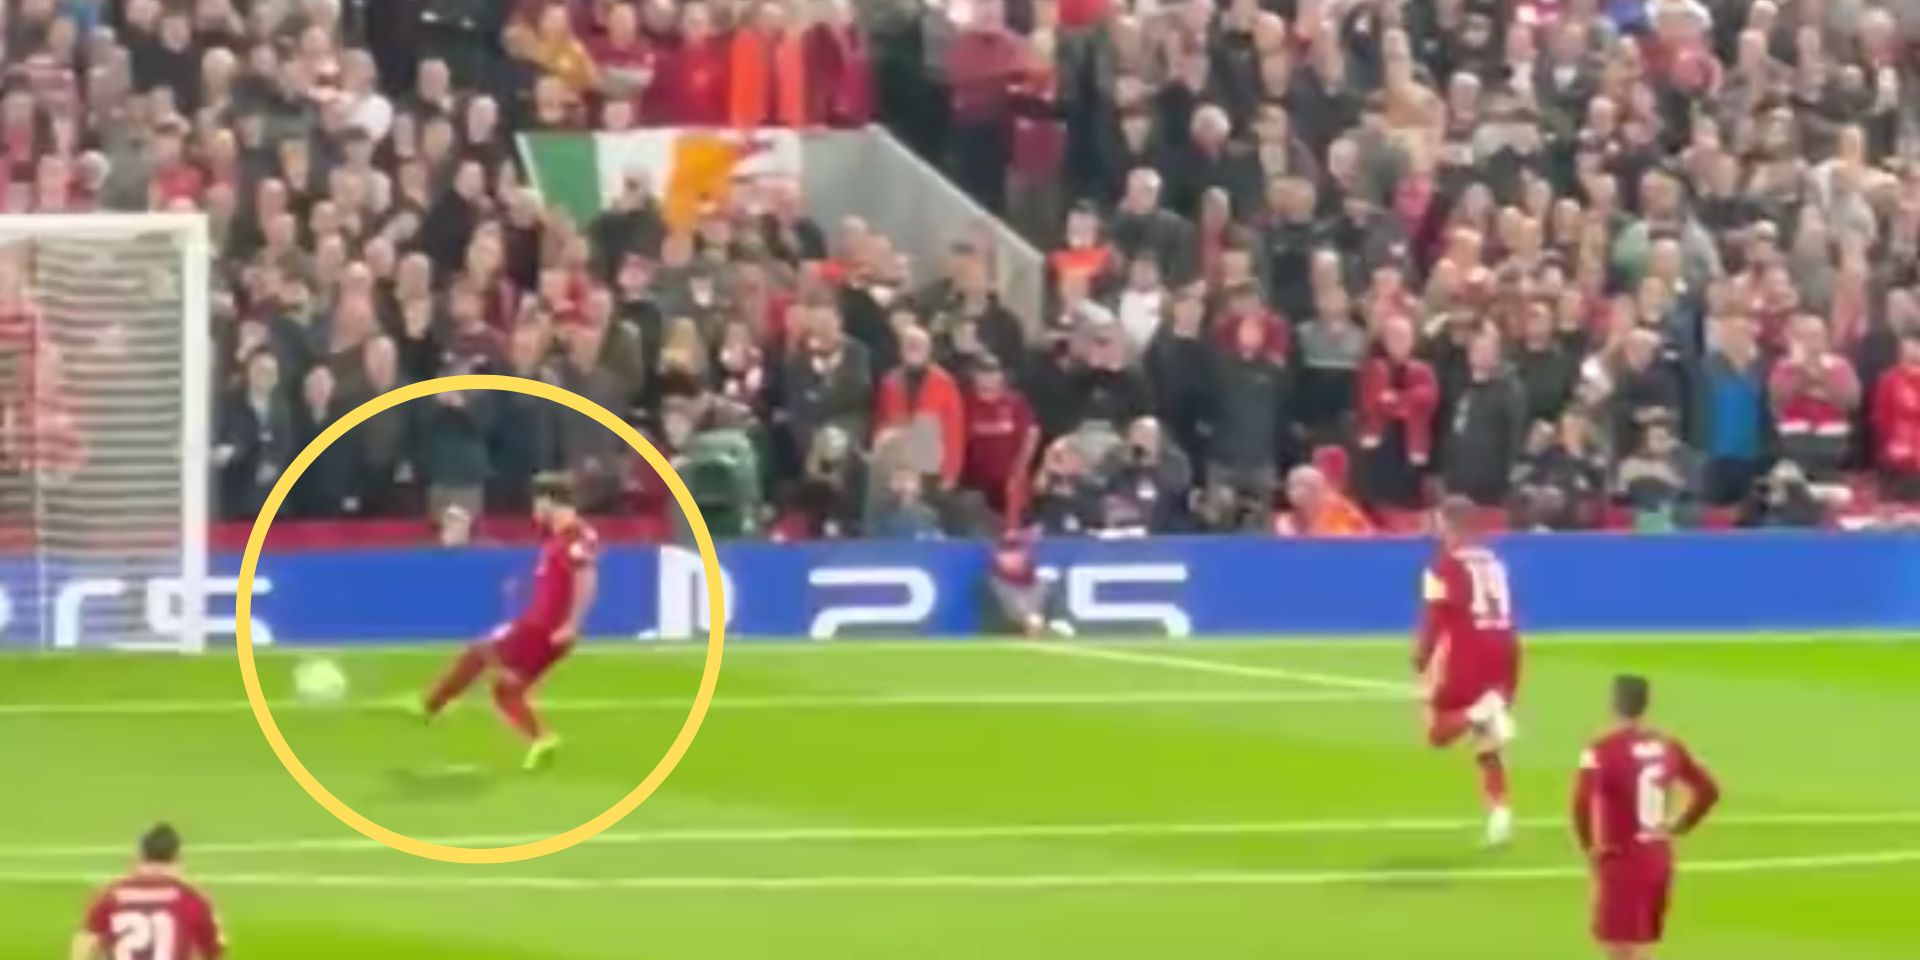 (Video) Mo Salah’s goal from the stands shows new angle of Henderson’s mimic run